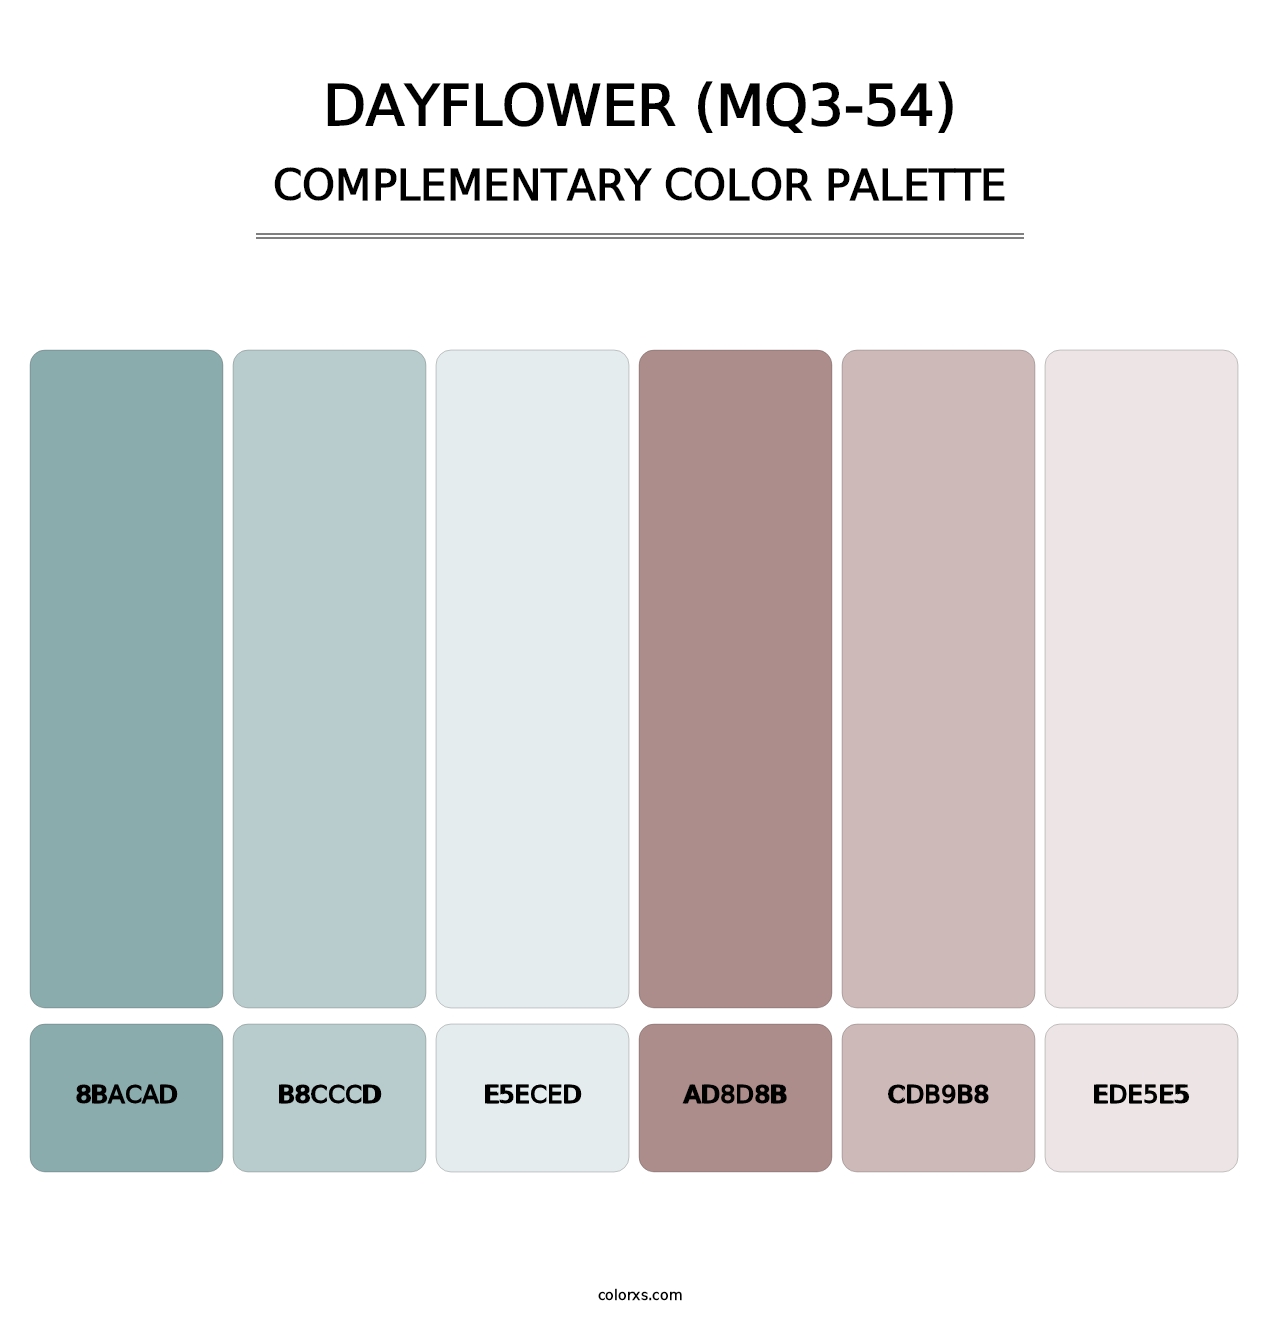 Dayflower (MQ3-54) - Complementary Color Palette